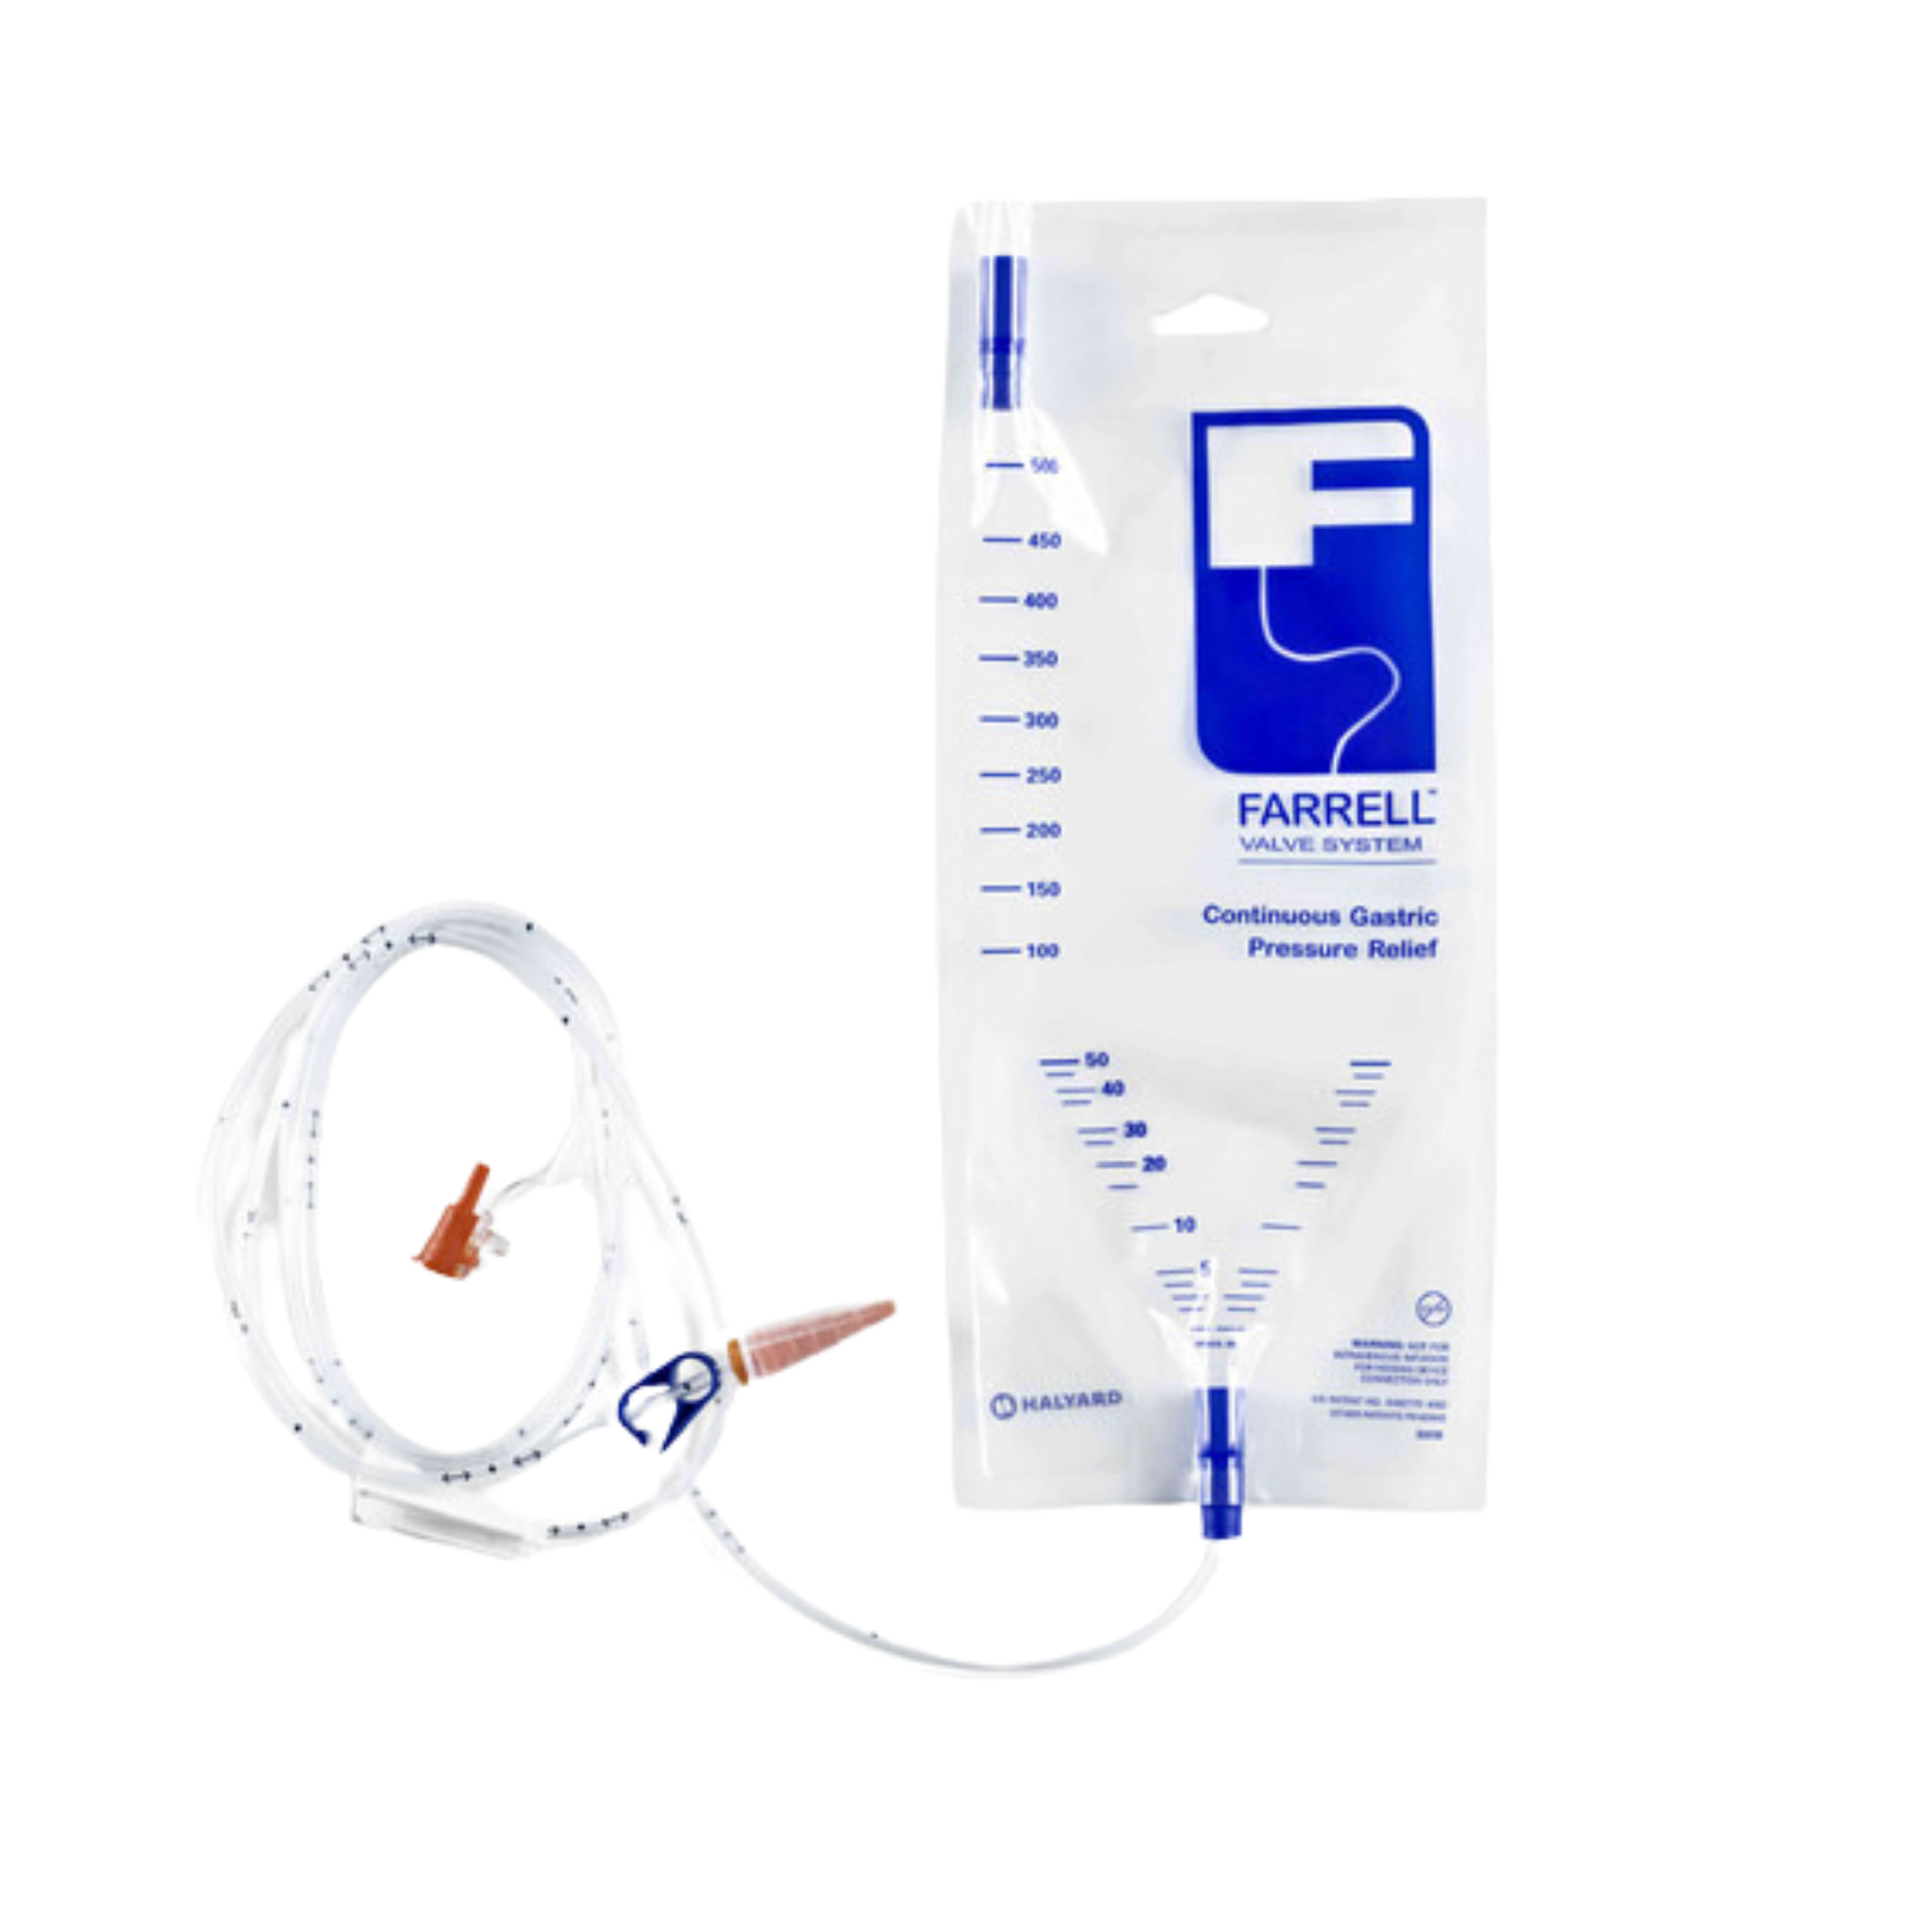 Avanos Farrell Valve Closed Enteral Decompression System With ENFIT Connector